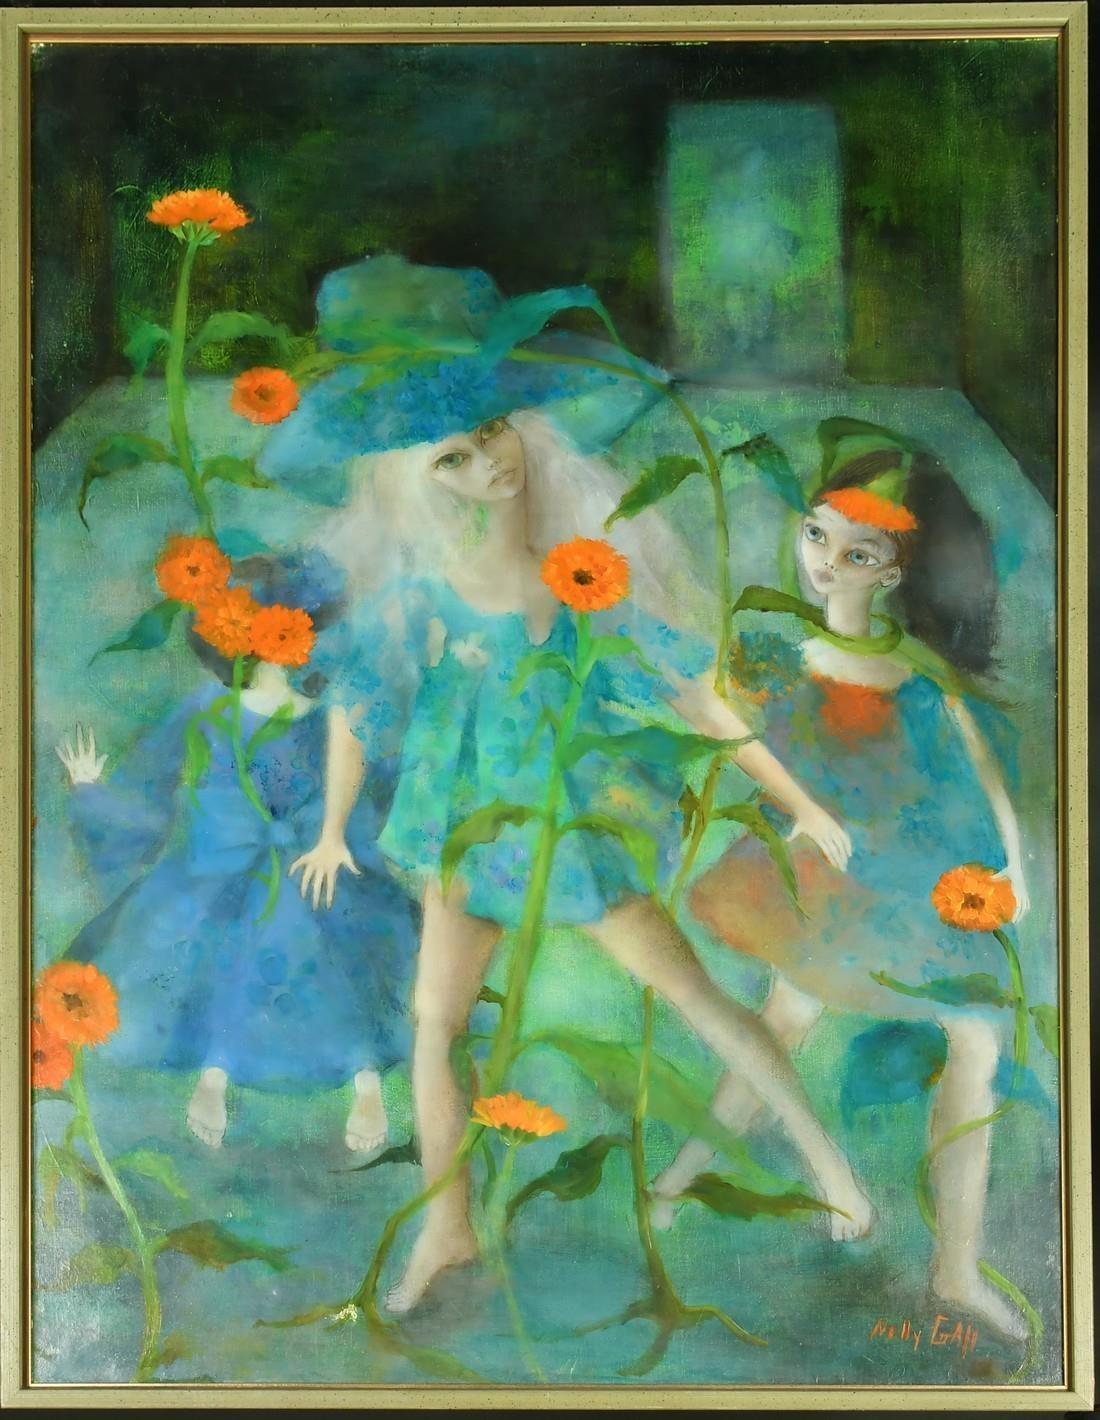 Nelly Gall / Gael (20th Century), three female figures dancing in a fantastical garden, 39.5" x 28. - Image 2 of 4